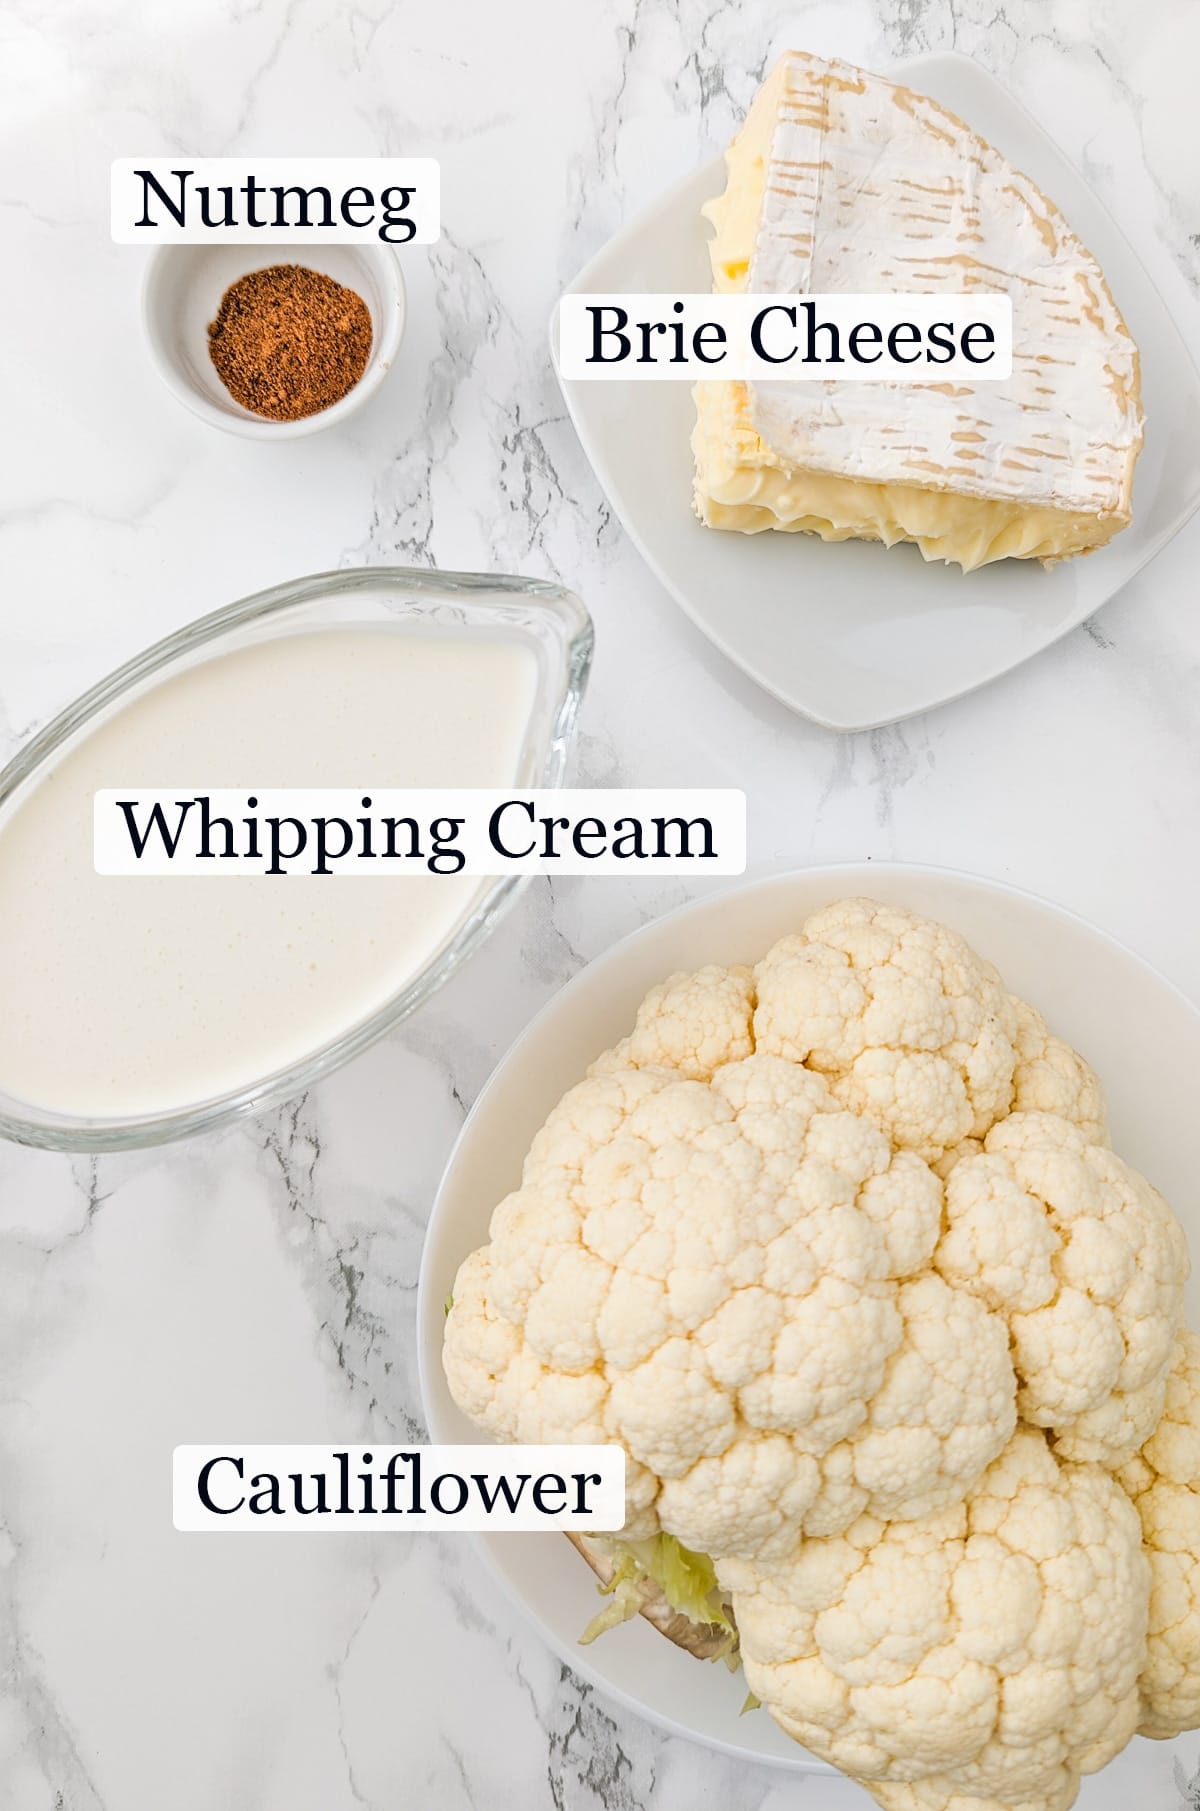 Cauliflower, whipping cream, nutmeg and brie cheese on a white marble table.